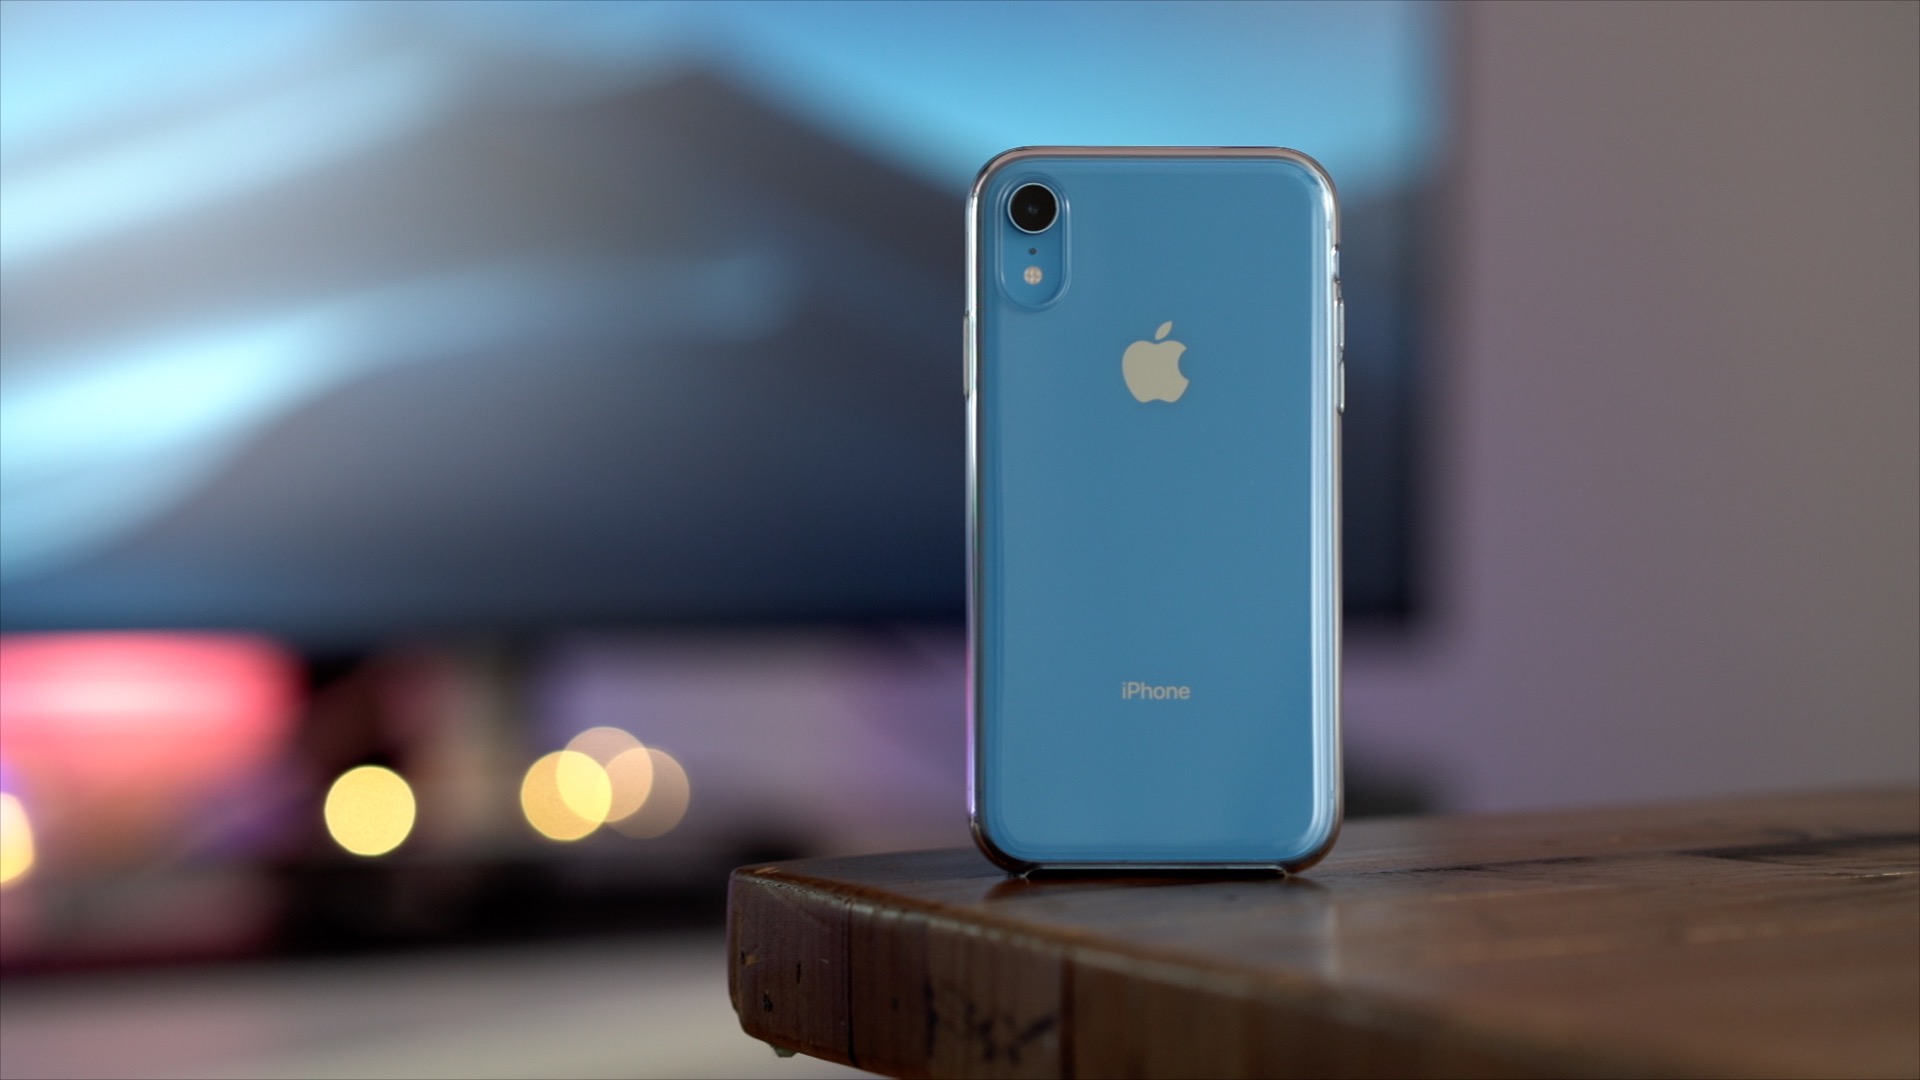 galerij Netjes puree iPhone XR made up 32% of iPhone sales in November, down from iPhone 8/8 Plus  in 2017 - 9to5Mac